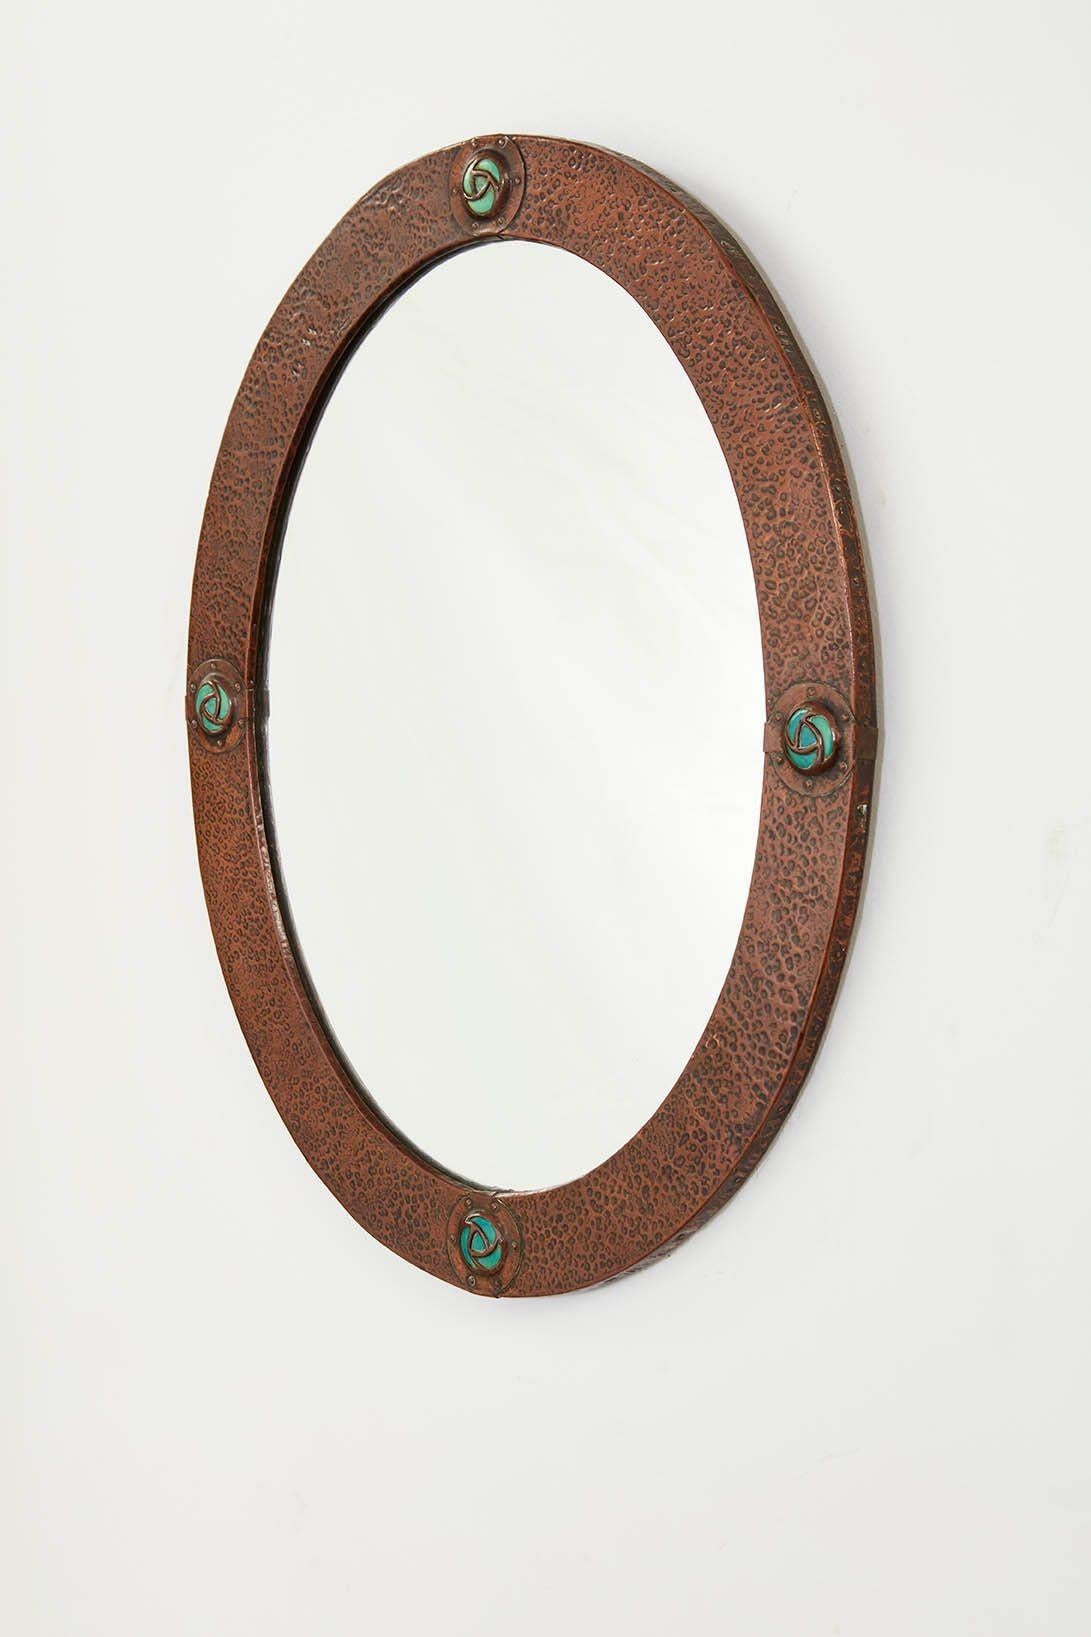 An arts & crafts oval copper mirror with hand hammered frame highlighted by four blue and copper studded cabuchons at the compass points